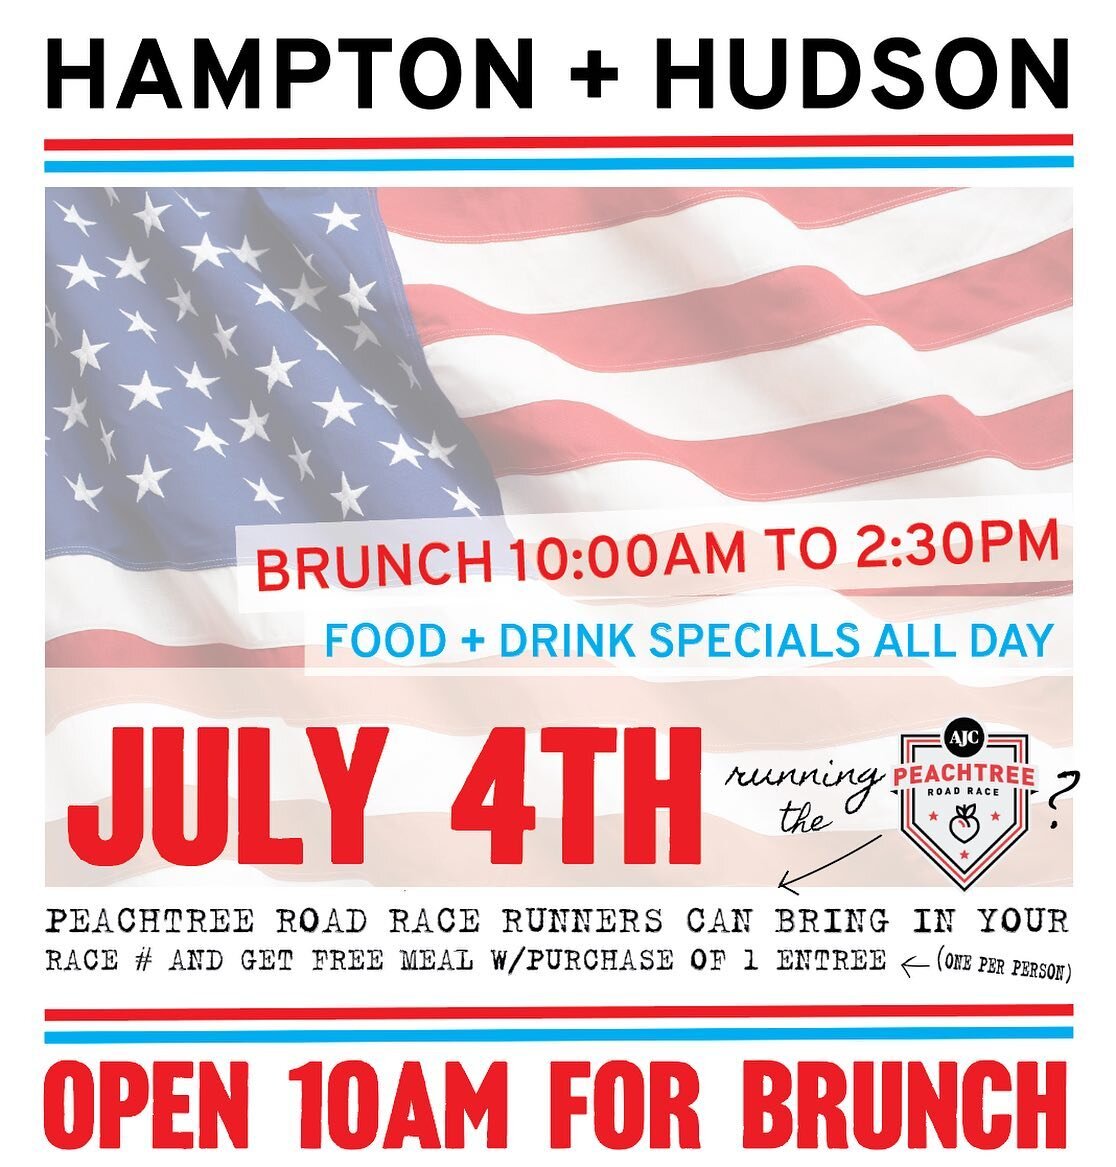 HAPPY 4th!

We OPEN at 10am for Brunch + Full Regular Menu all day!

Peachtree Road Racers bring in your number this morning and with the purchase if (1) entree you will get yours free! 

&hellip;

&bull; $2 Budweiser cans
&bull; $4 House Draft (Crea